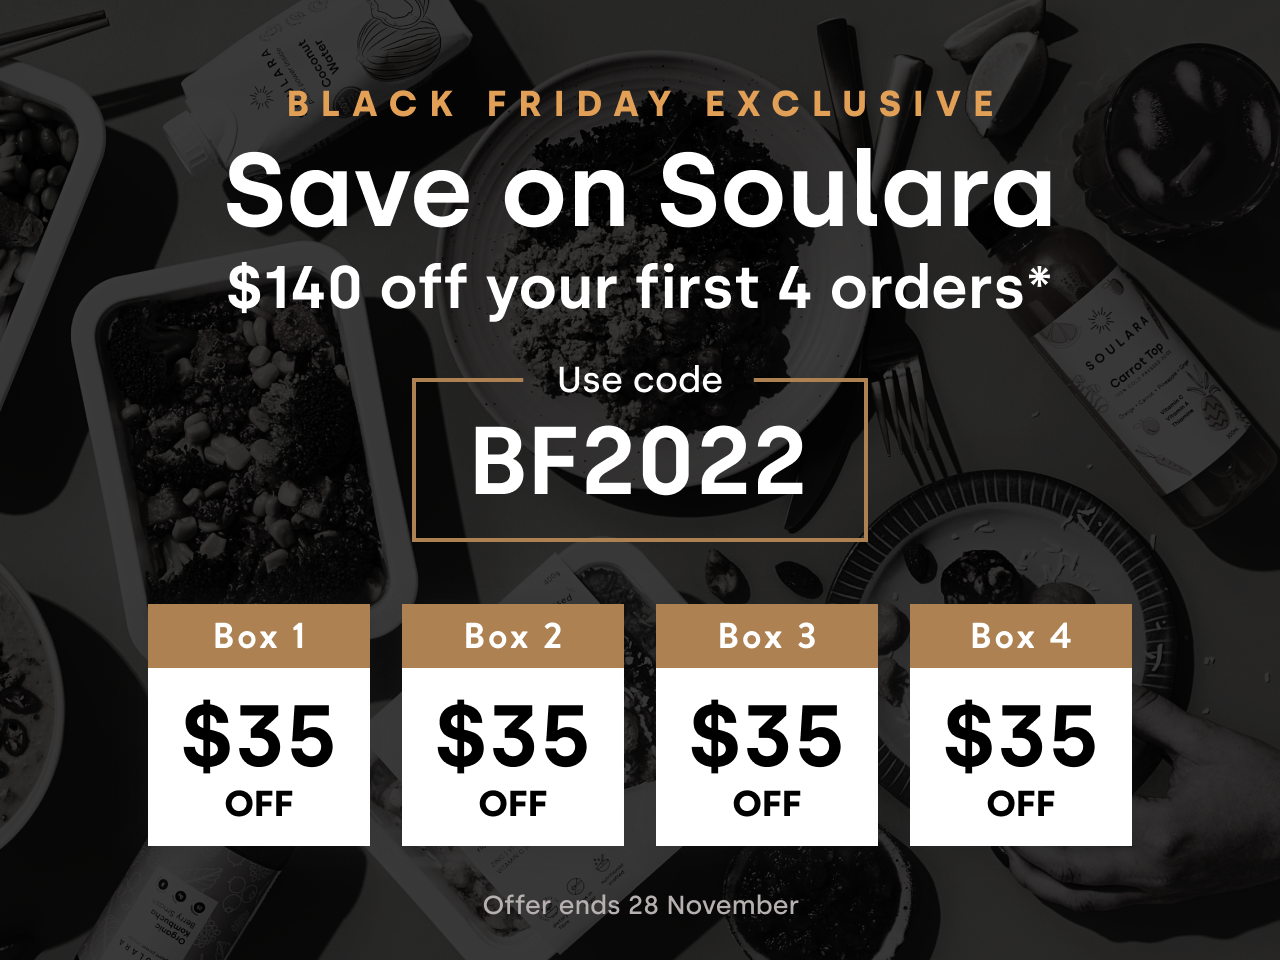 Save on Soulara: $140 off your first 4 orders